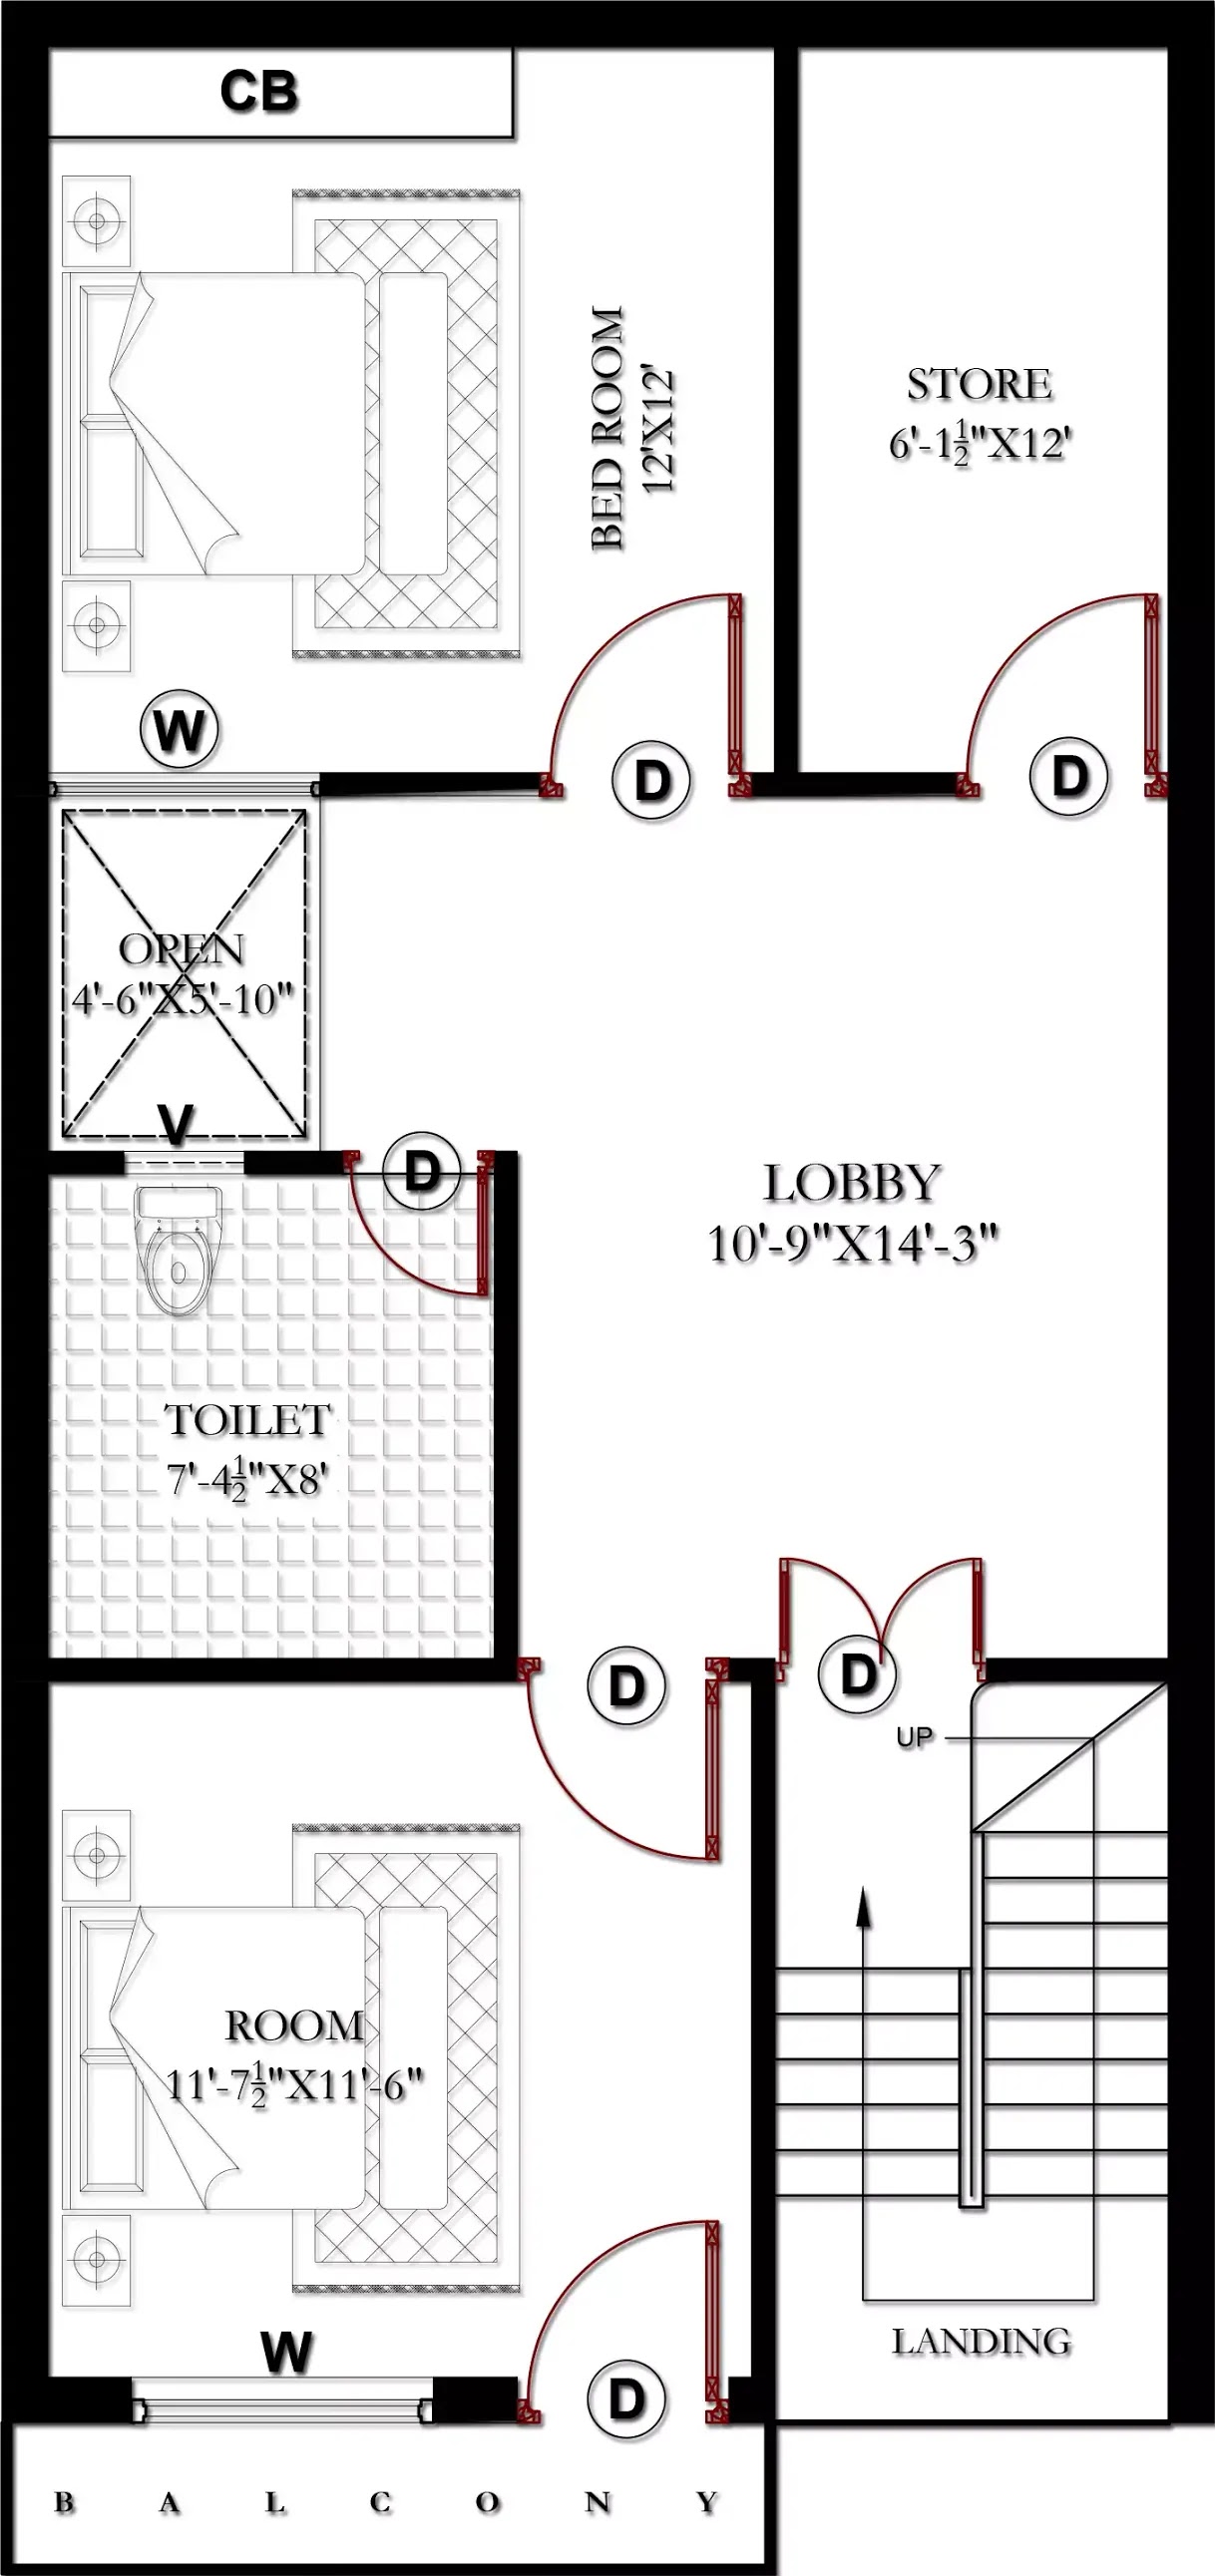 Floor Plan For x40 Ft 2bhk Without Car Parking 800 Sqft Sumit Kush